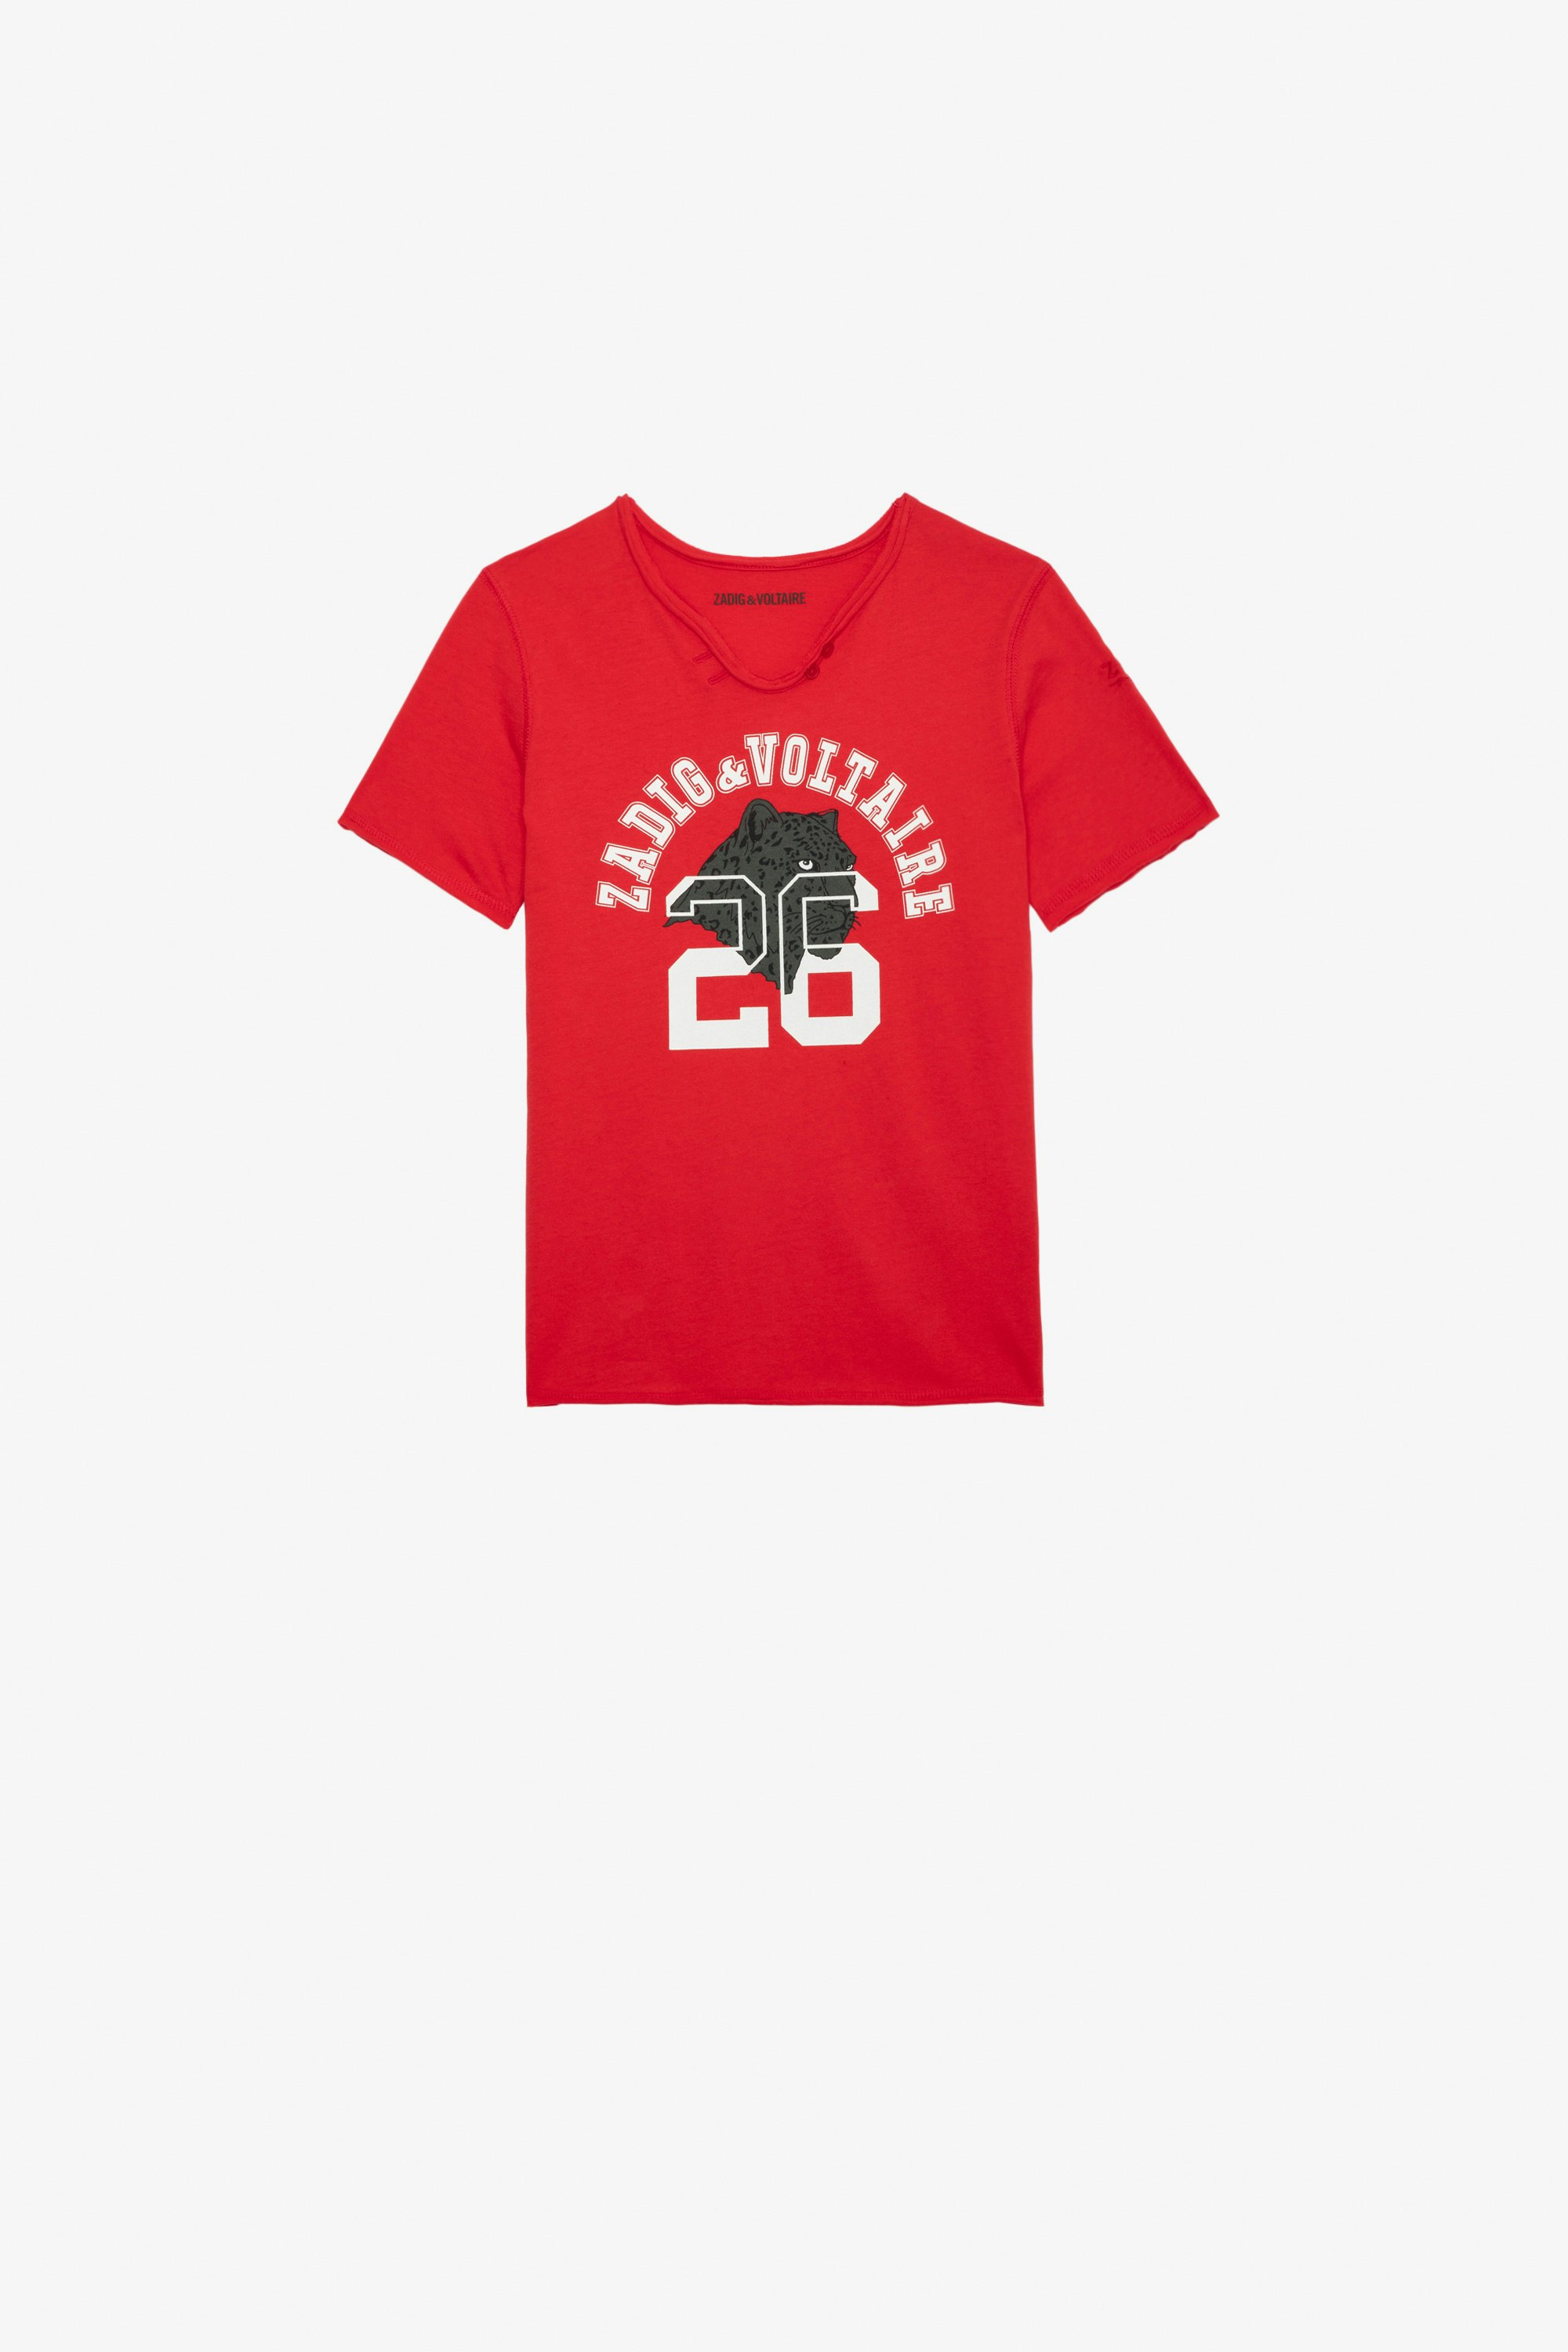 Boxer Boys’ T-Shirt - Boys’ red cotton jersey short-sleeved T-shirt with print.